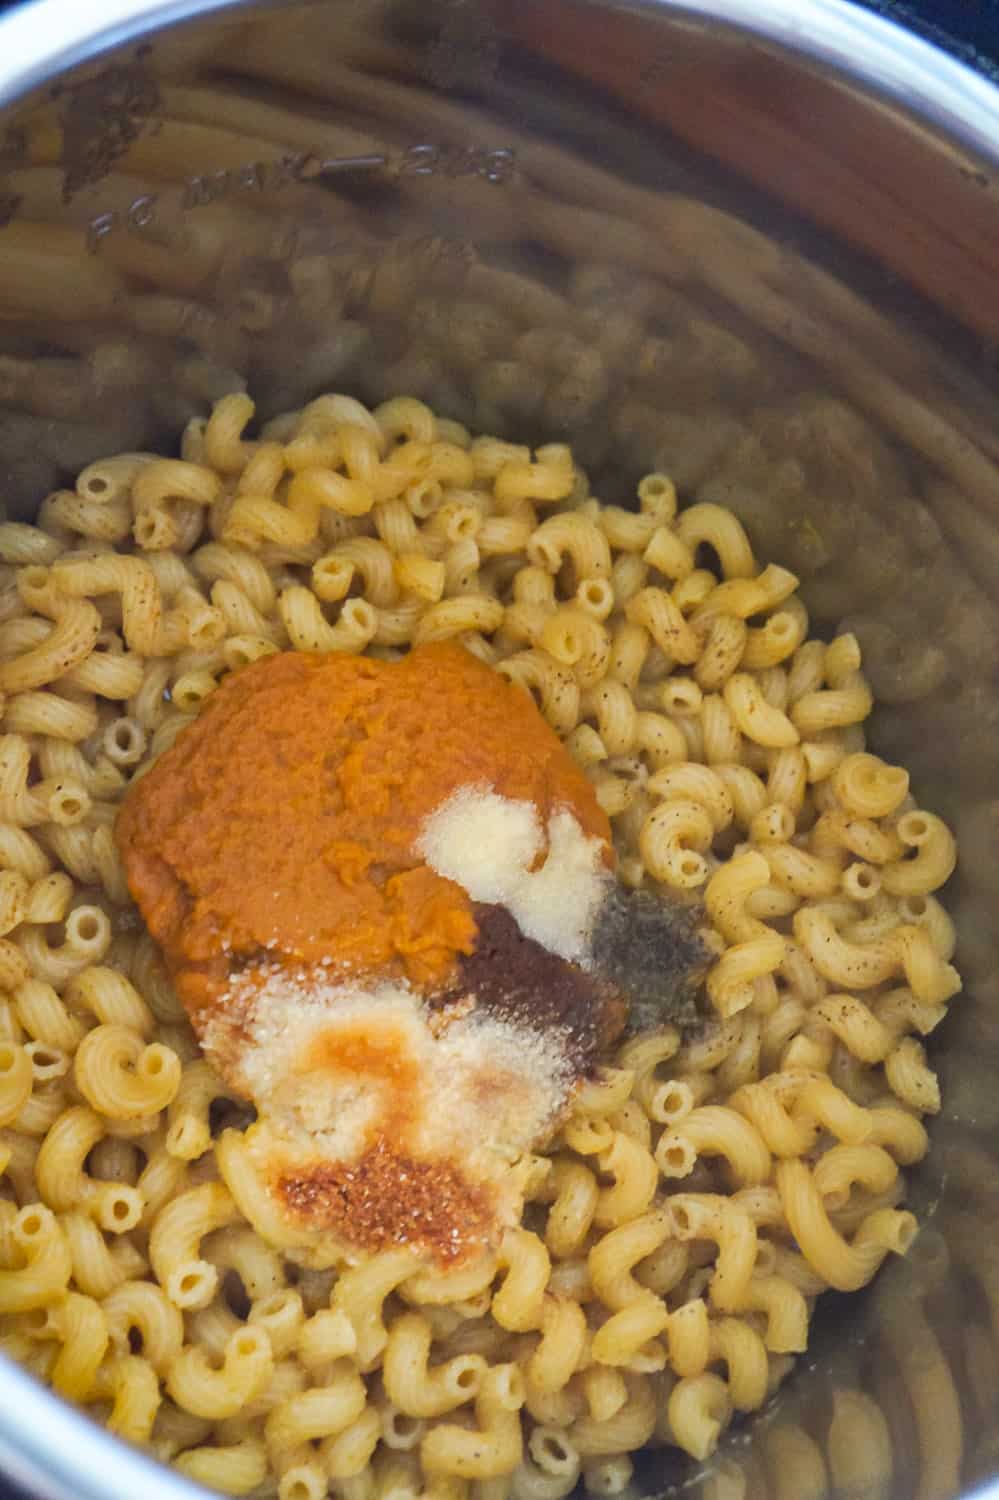 canned pumpkin and spices on top of pasta after cooking in an Instant Pot